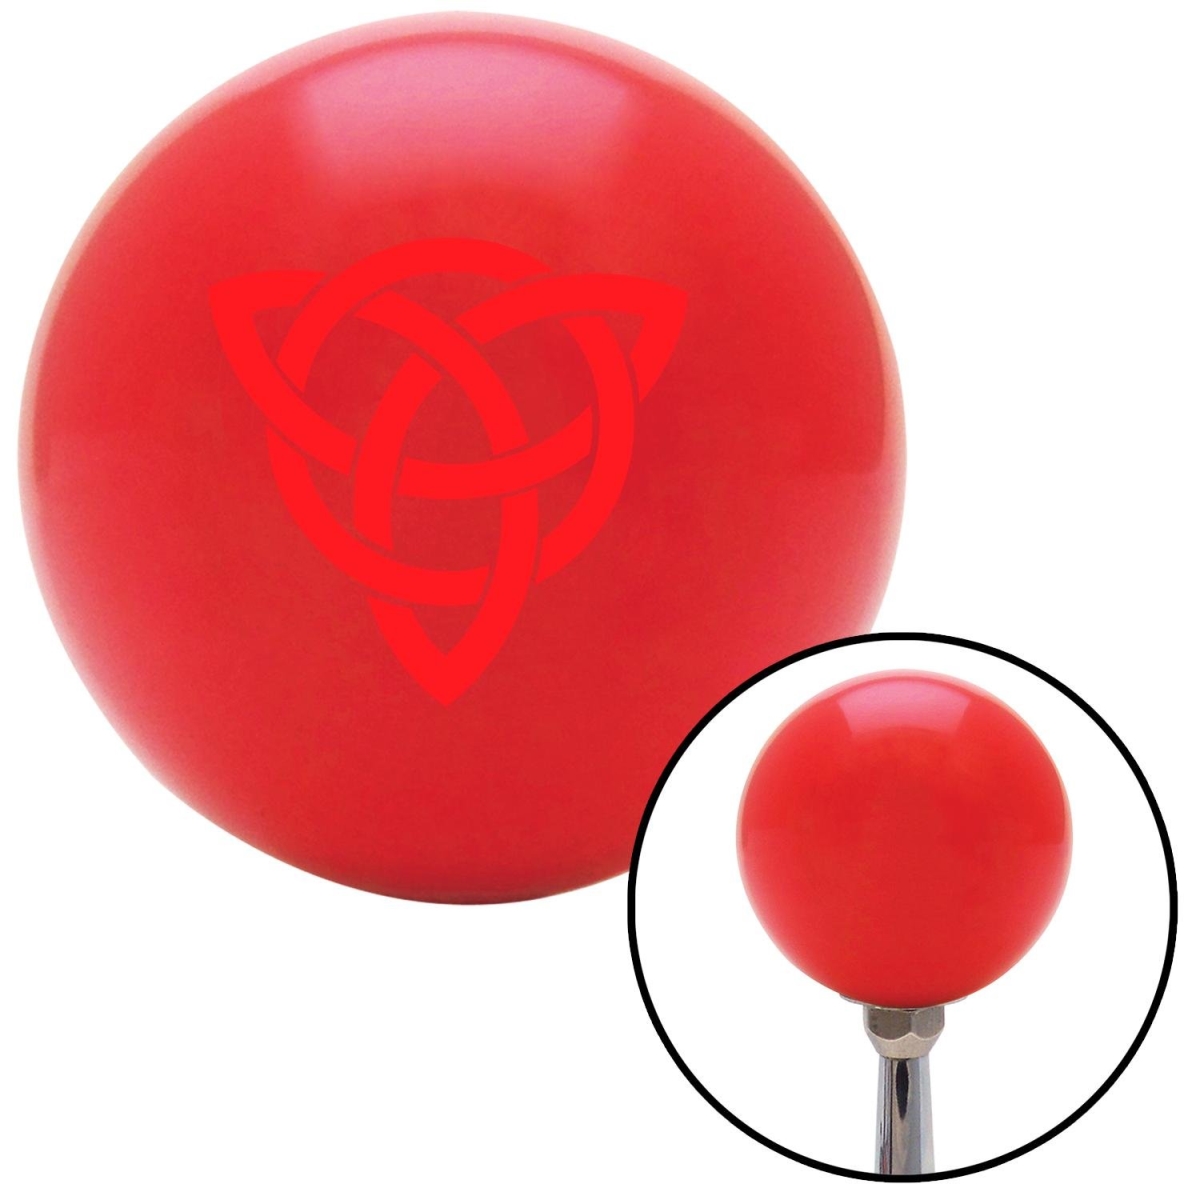 Picture of American Shifter 101585 Red Celtic Design No.2 Red Shift Knob with M16 x 1.5 Insert Shifter Auto Manual Brody